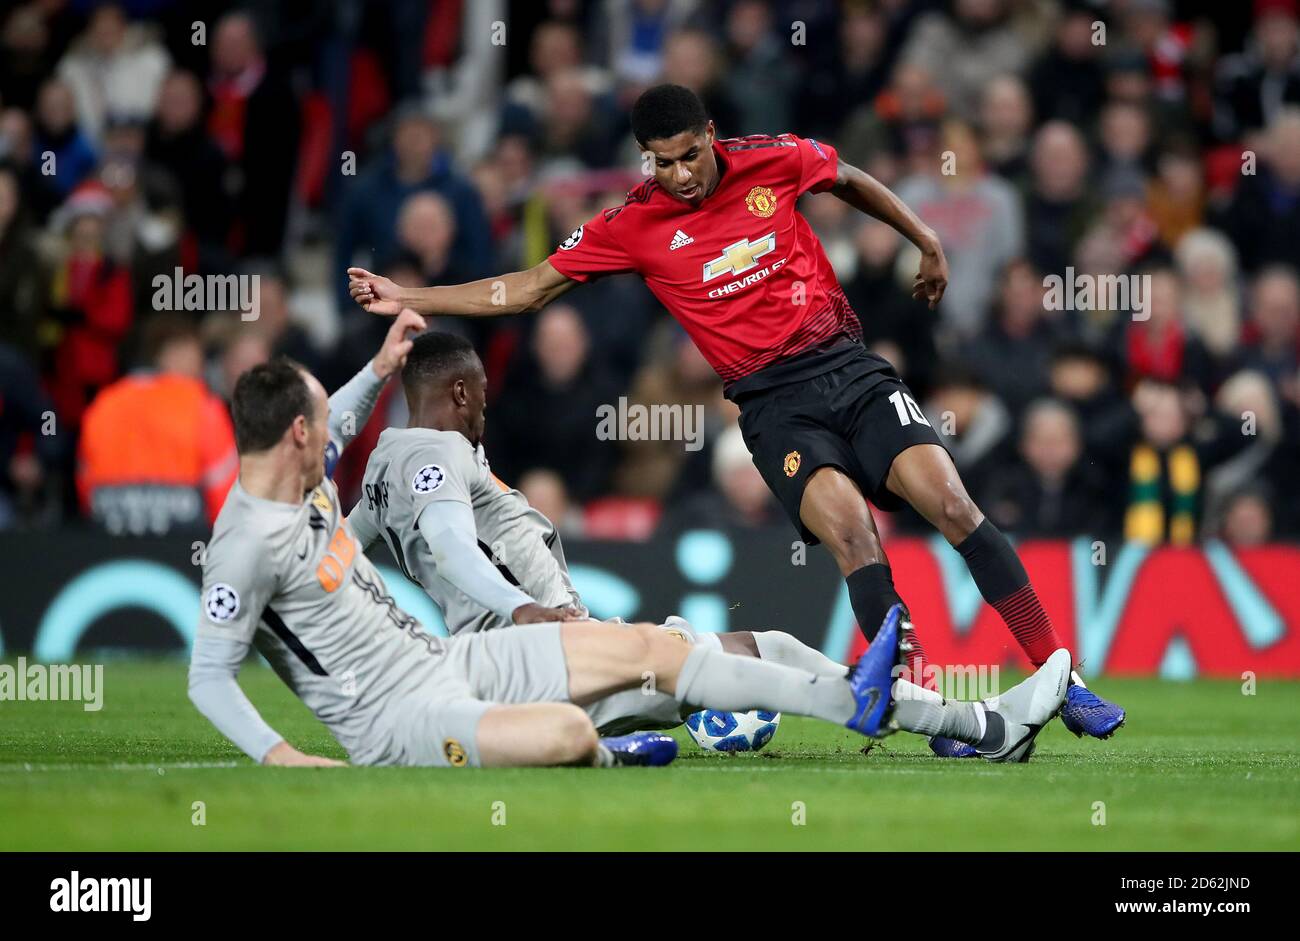 BSC Young Boys' Mohamed Ali Camara (centre) and BSC Young Boys' Steve von Bergen (left) slide in on Manchester United's Marcus Rashford Stock Photo